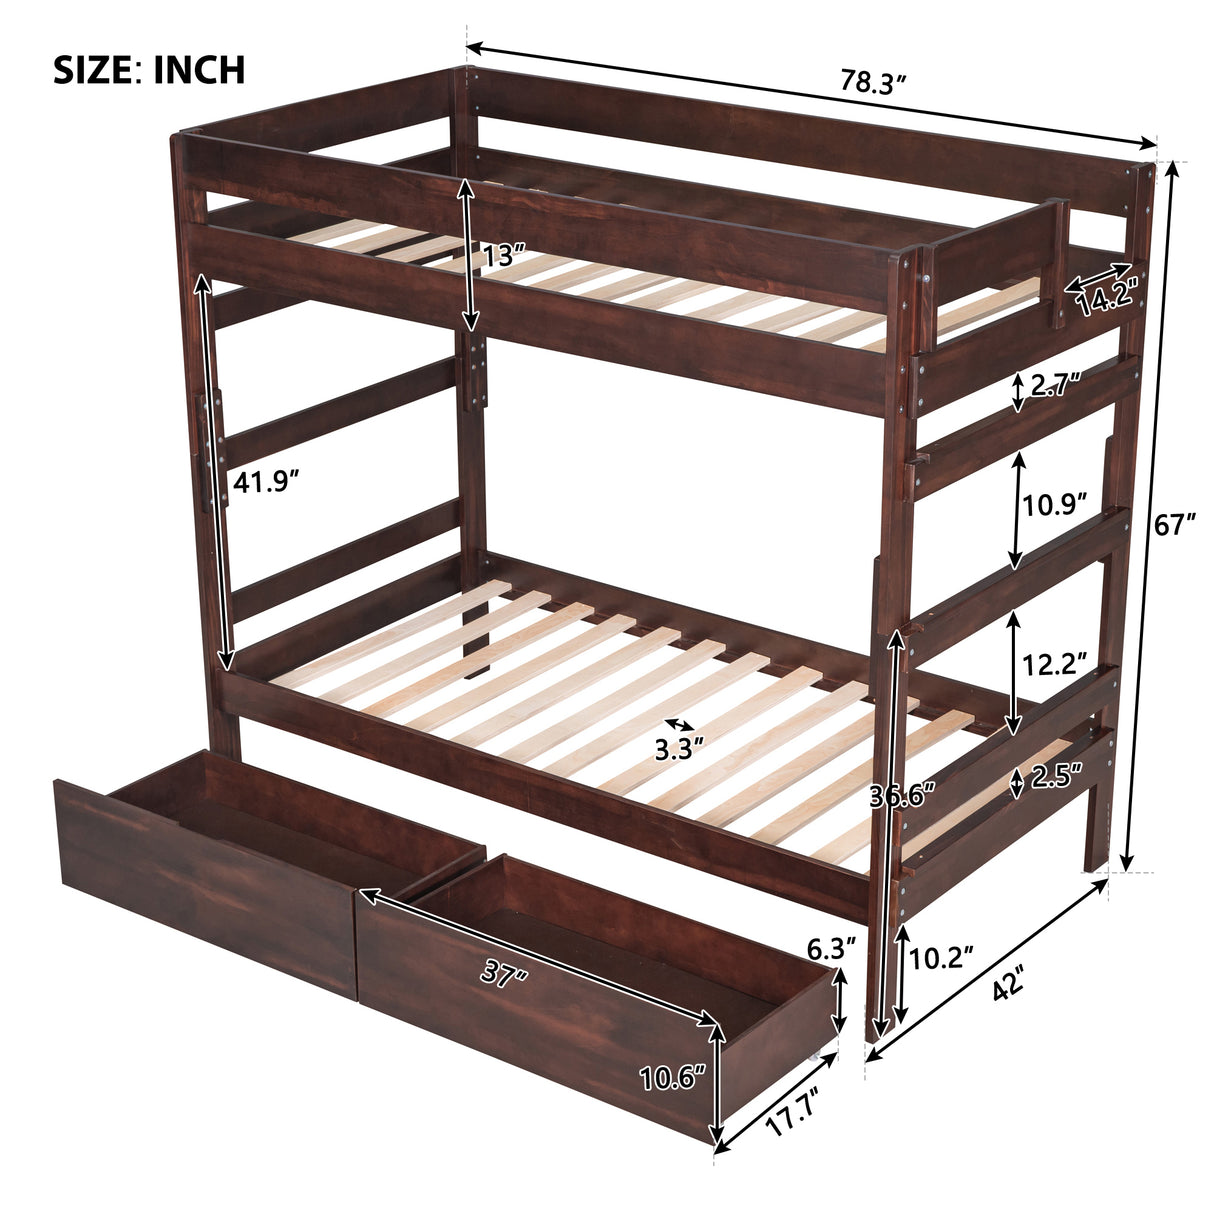 Twin over Twin Wood Bunk Bed with 2 Drawers, Espresso - Home Elegance USA